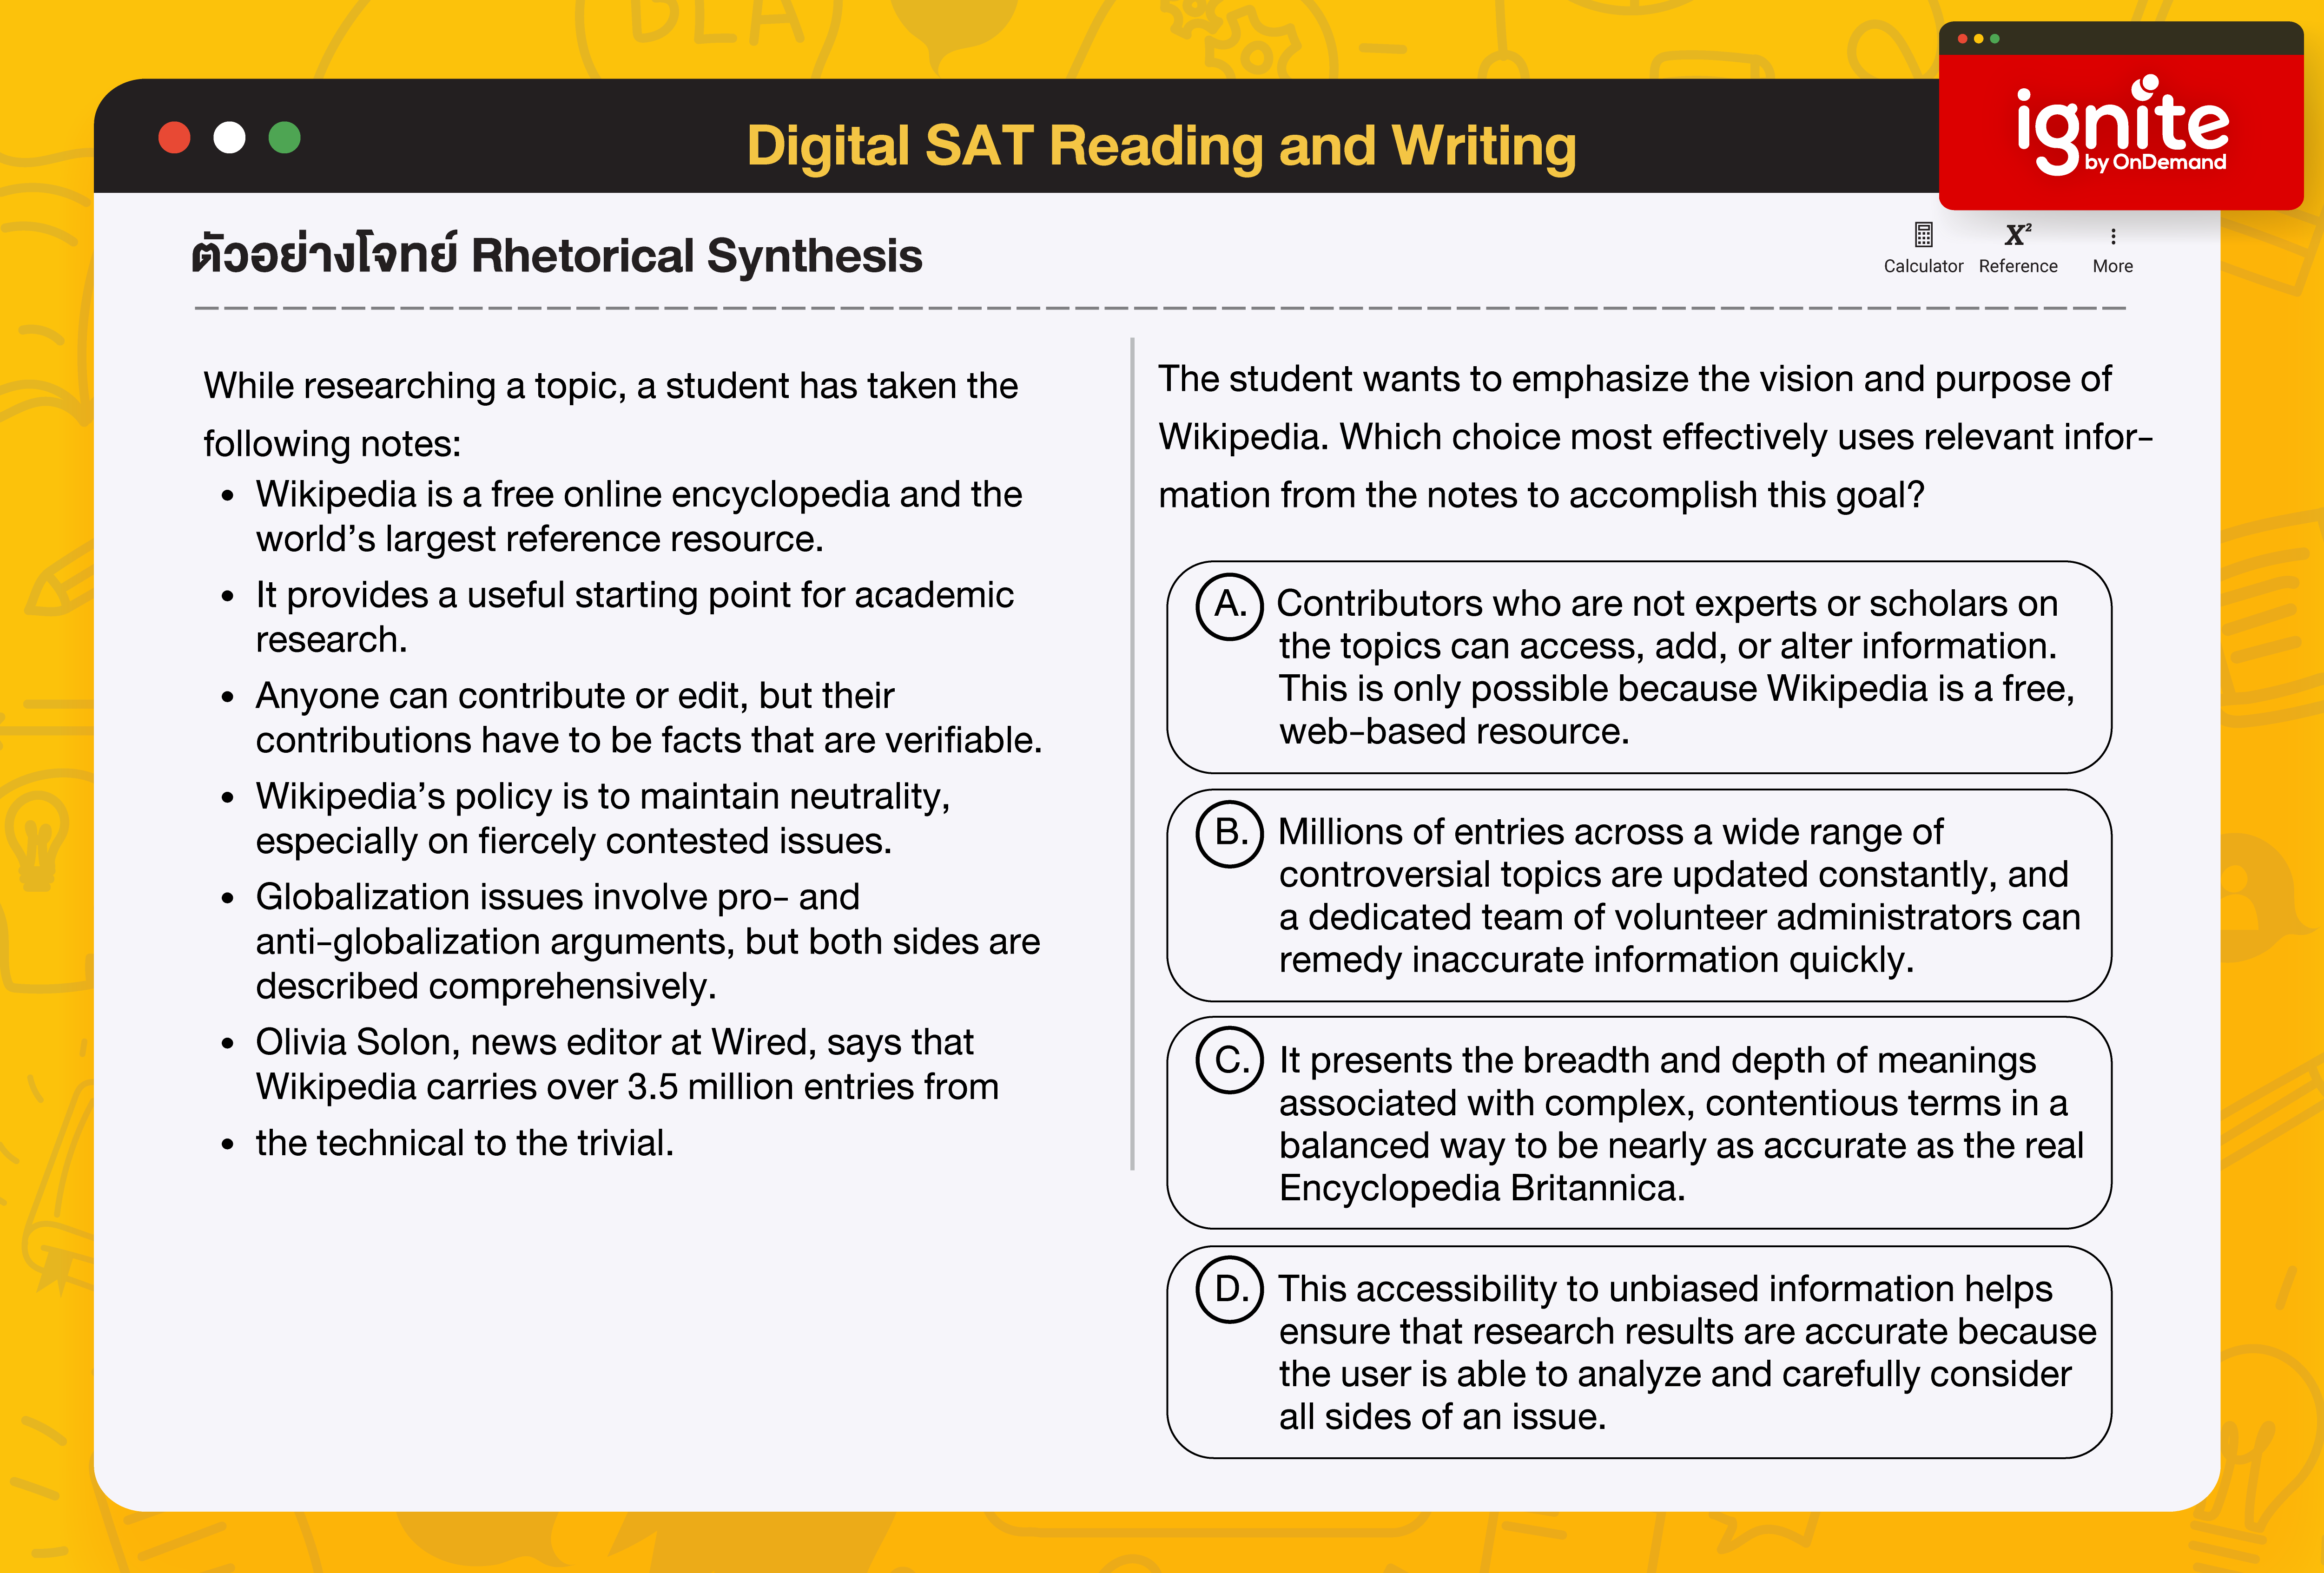 Rhetorical Synthesis - Digital SAT Reading and Wrting 2023 - ignite by OnDemand